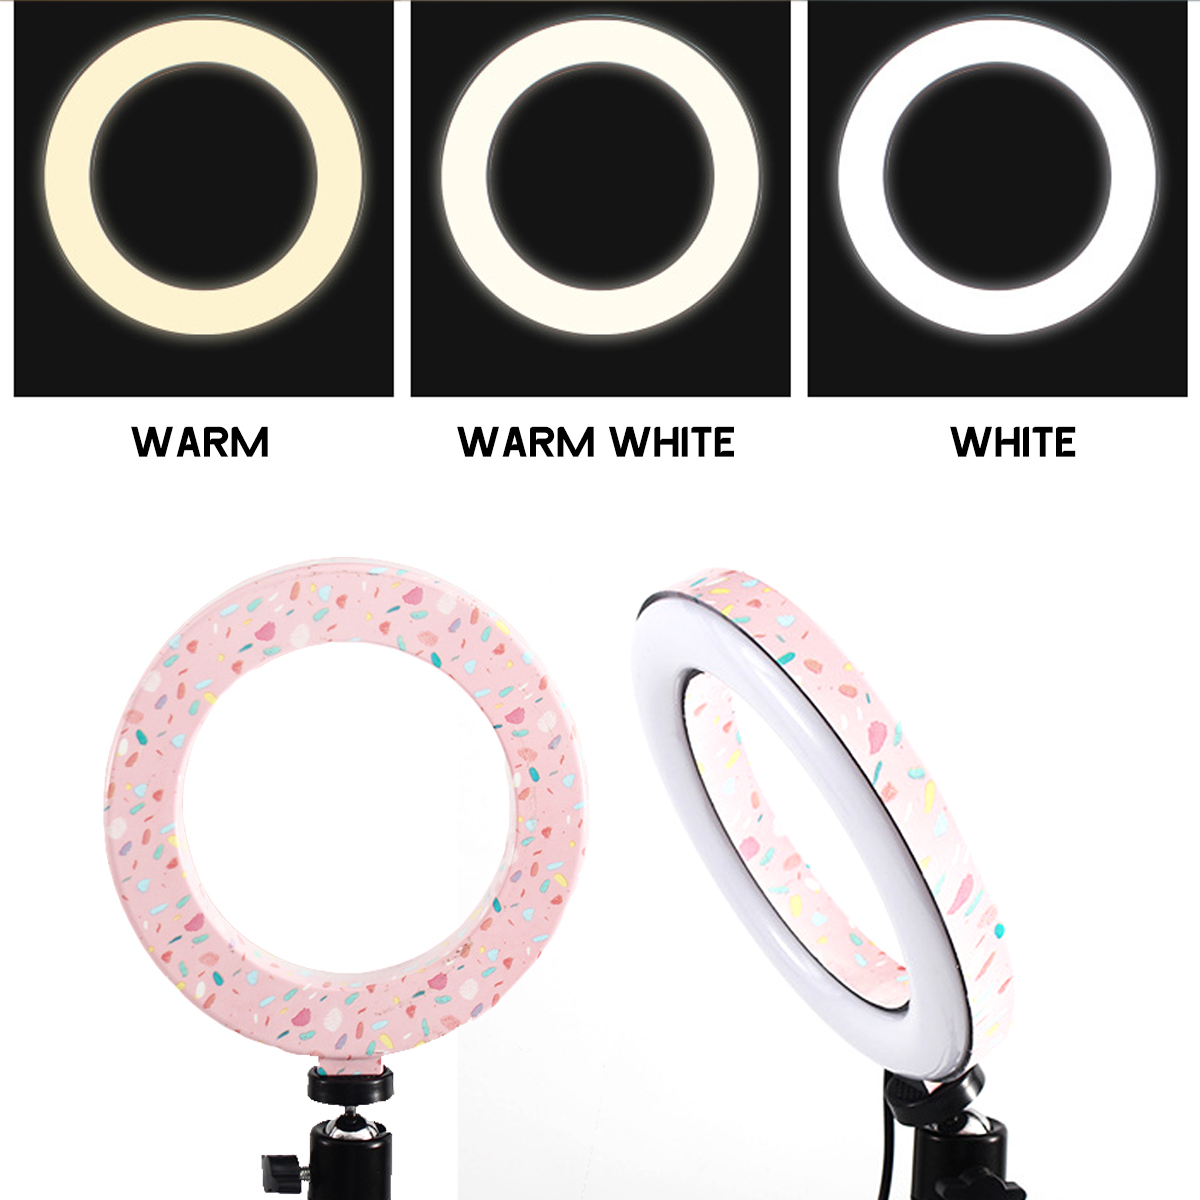 10-inch-LED-Ring-Light-Fill-Light-For-Makeup-Streaming-Selfie-Beauty-Photography-Makeup-Mirror-Light-1634941-4